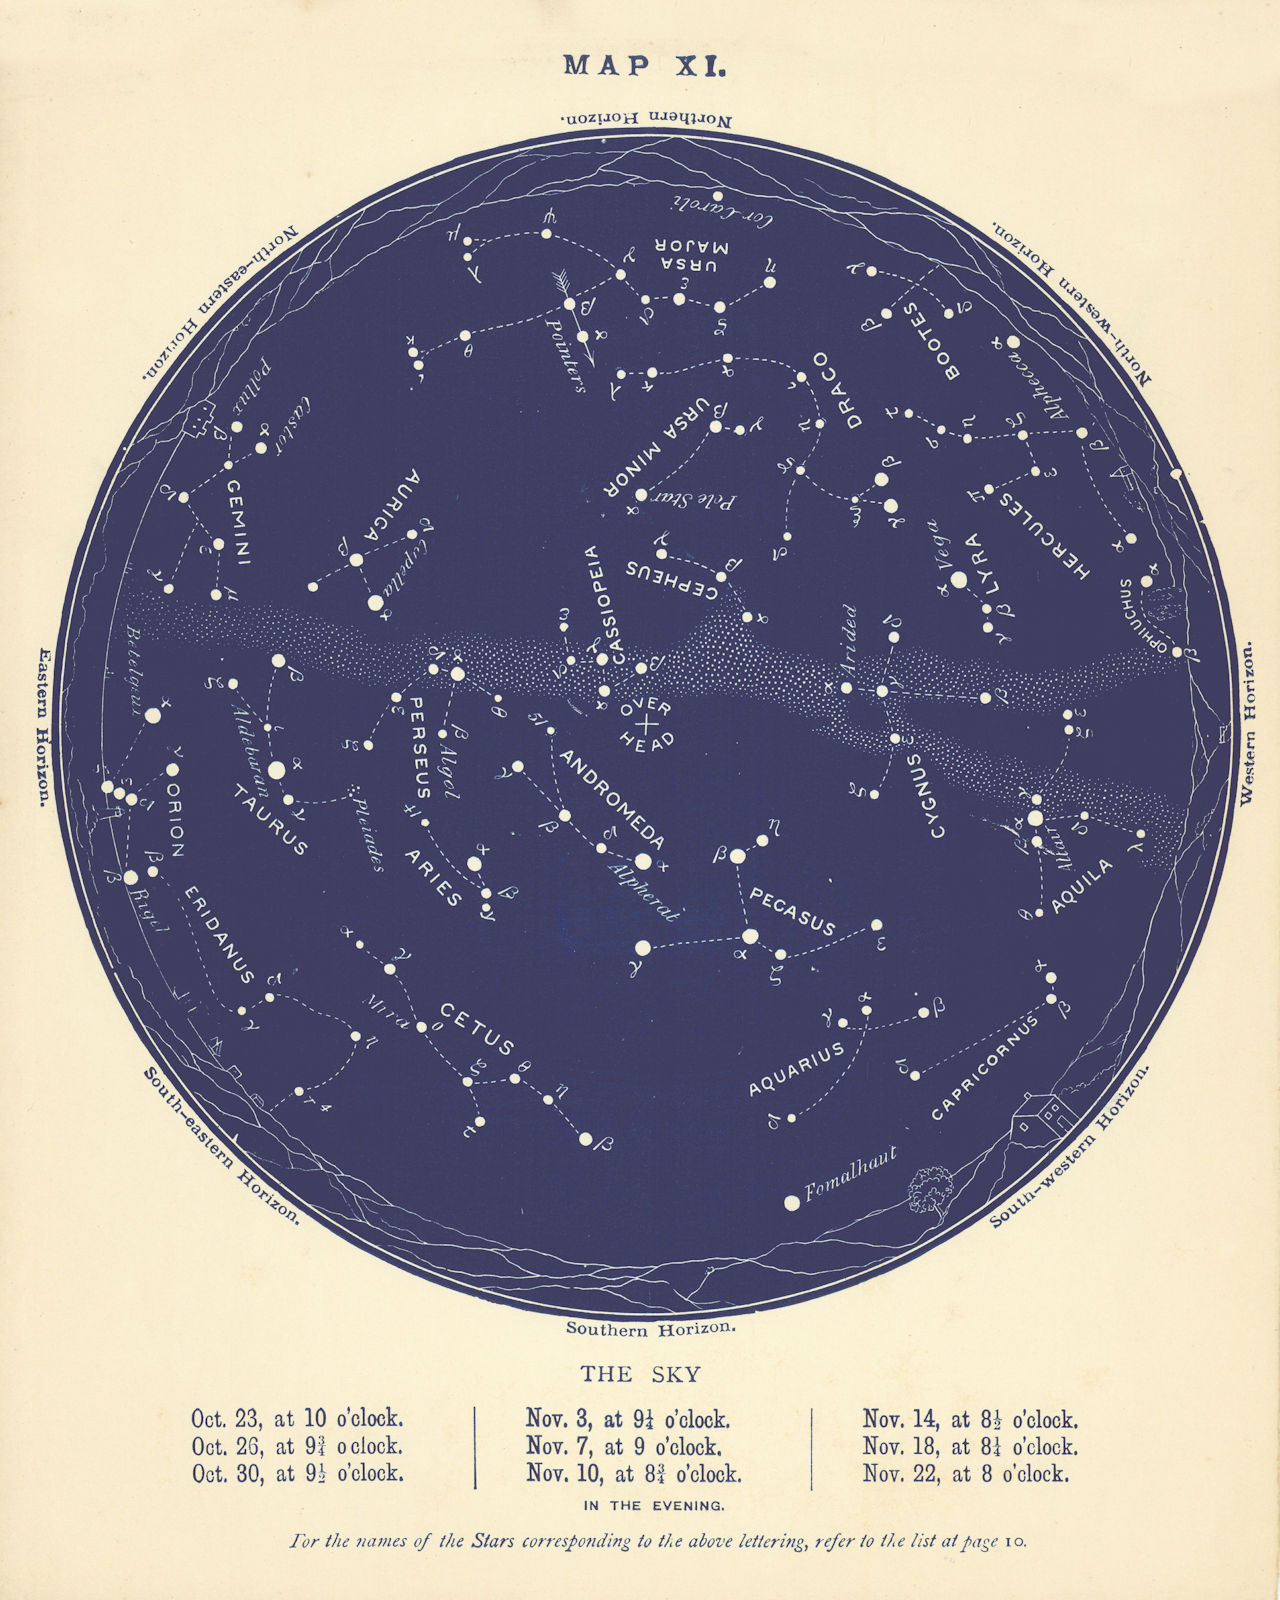 STAR MAP XI. The Night Sky. October-November. Astronomy. PROCTOR 1896 old